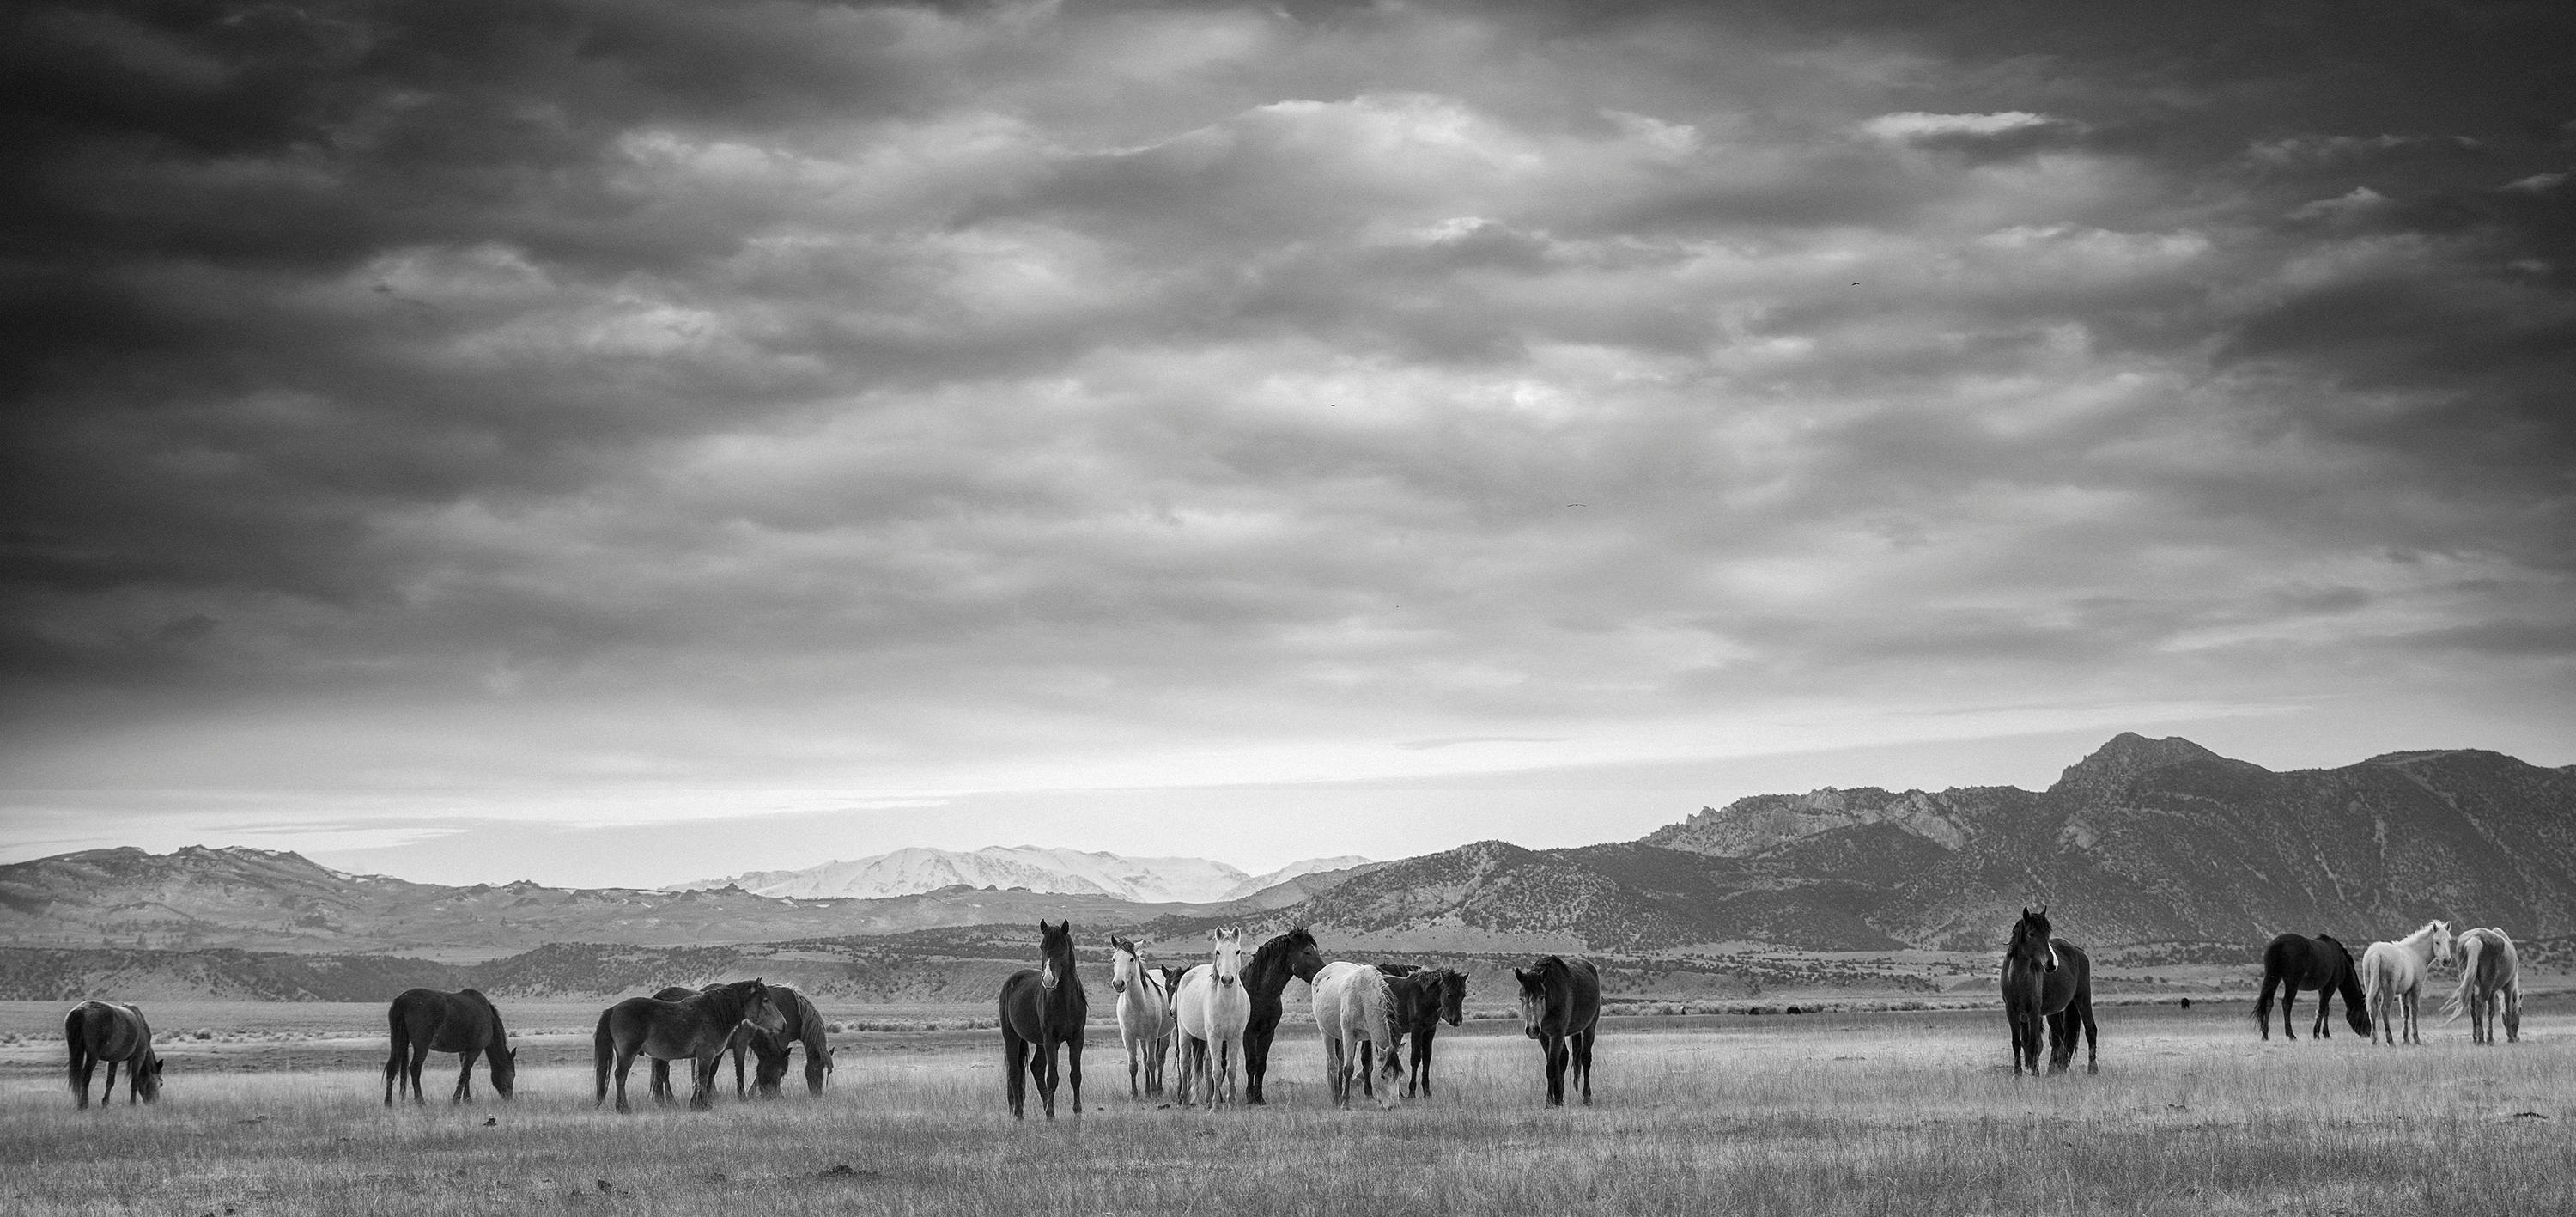 "Gangs All Here" - 30x20 Wild Horse Photography, Photograph by Shane Russeck